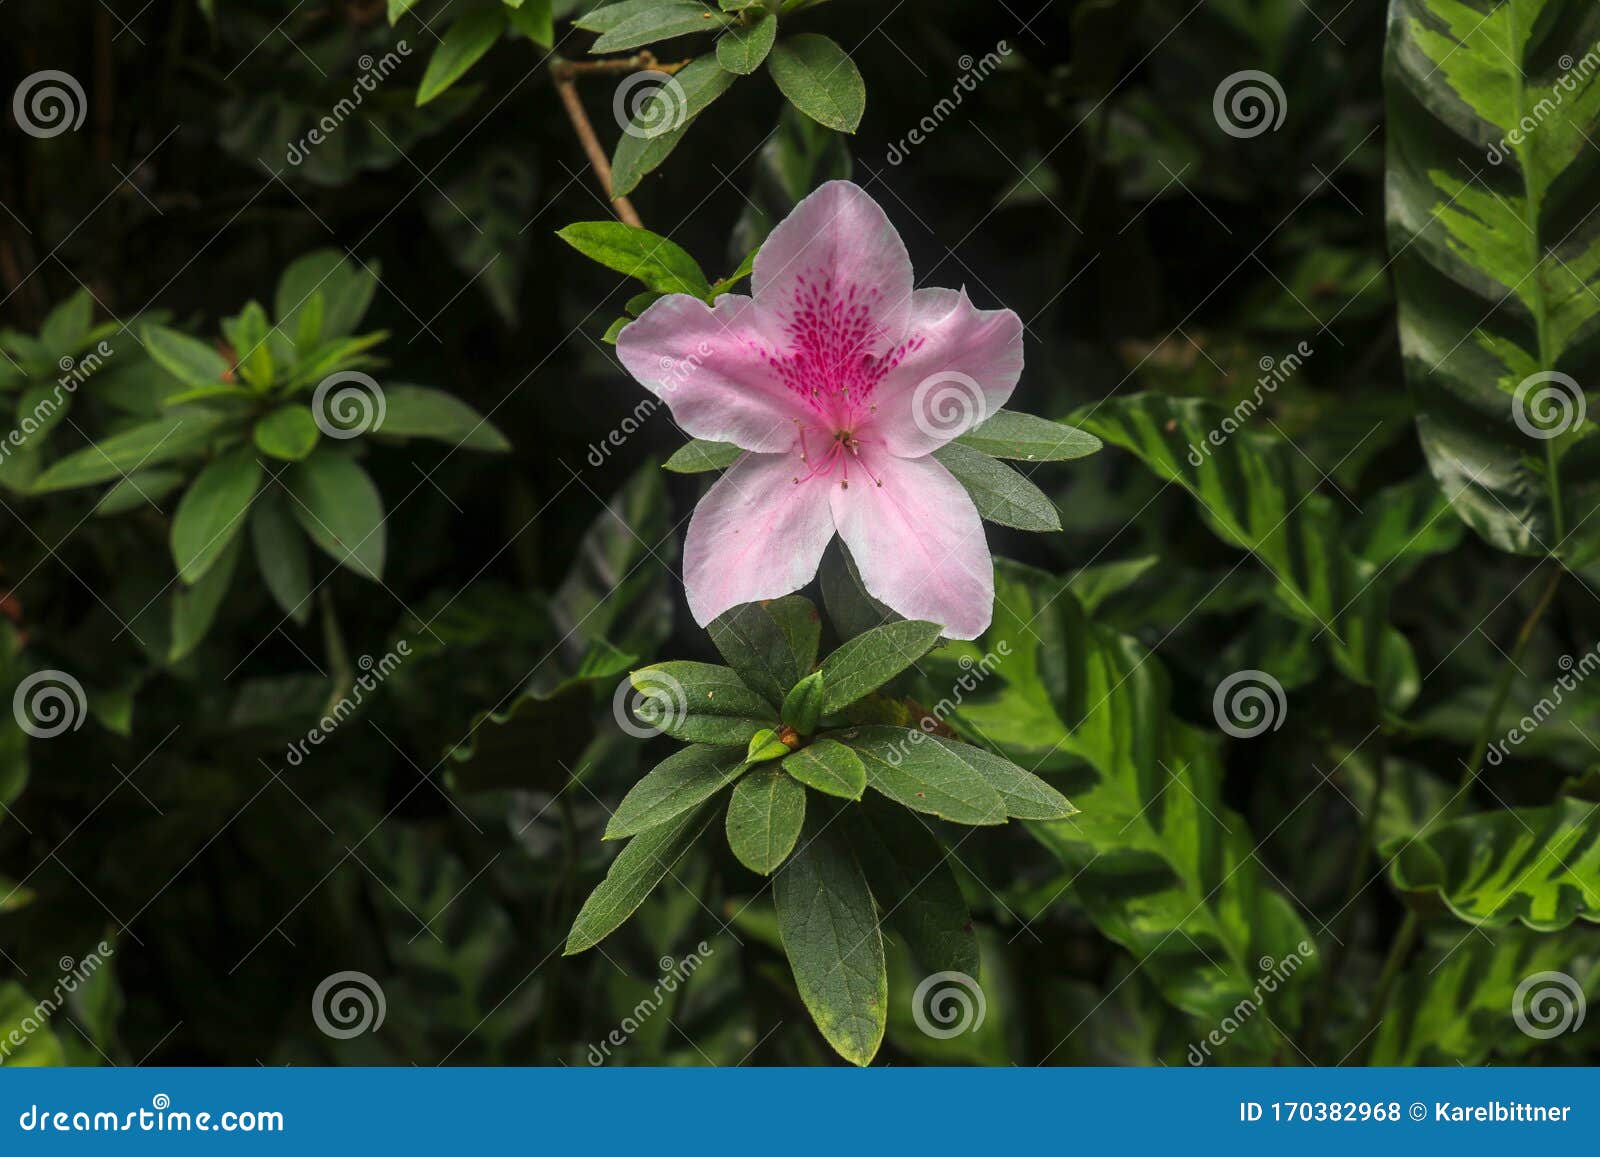 close up shot of pink rhododendron simsii flower blossom in bali, indonesia. spring flowers series, pink azalea flowers.